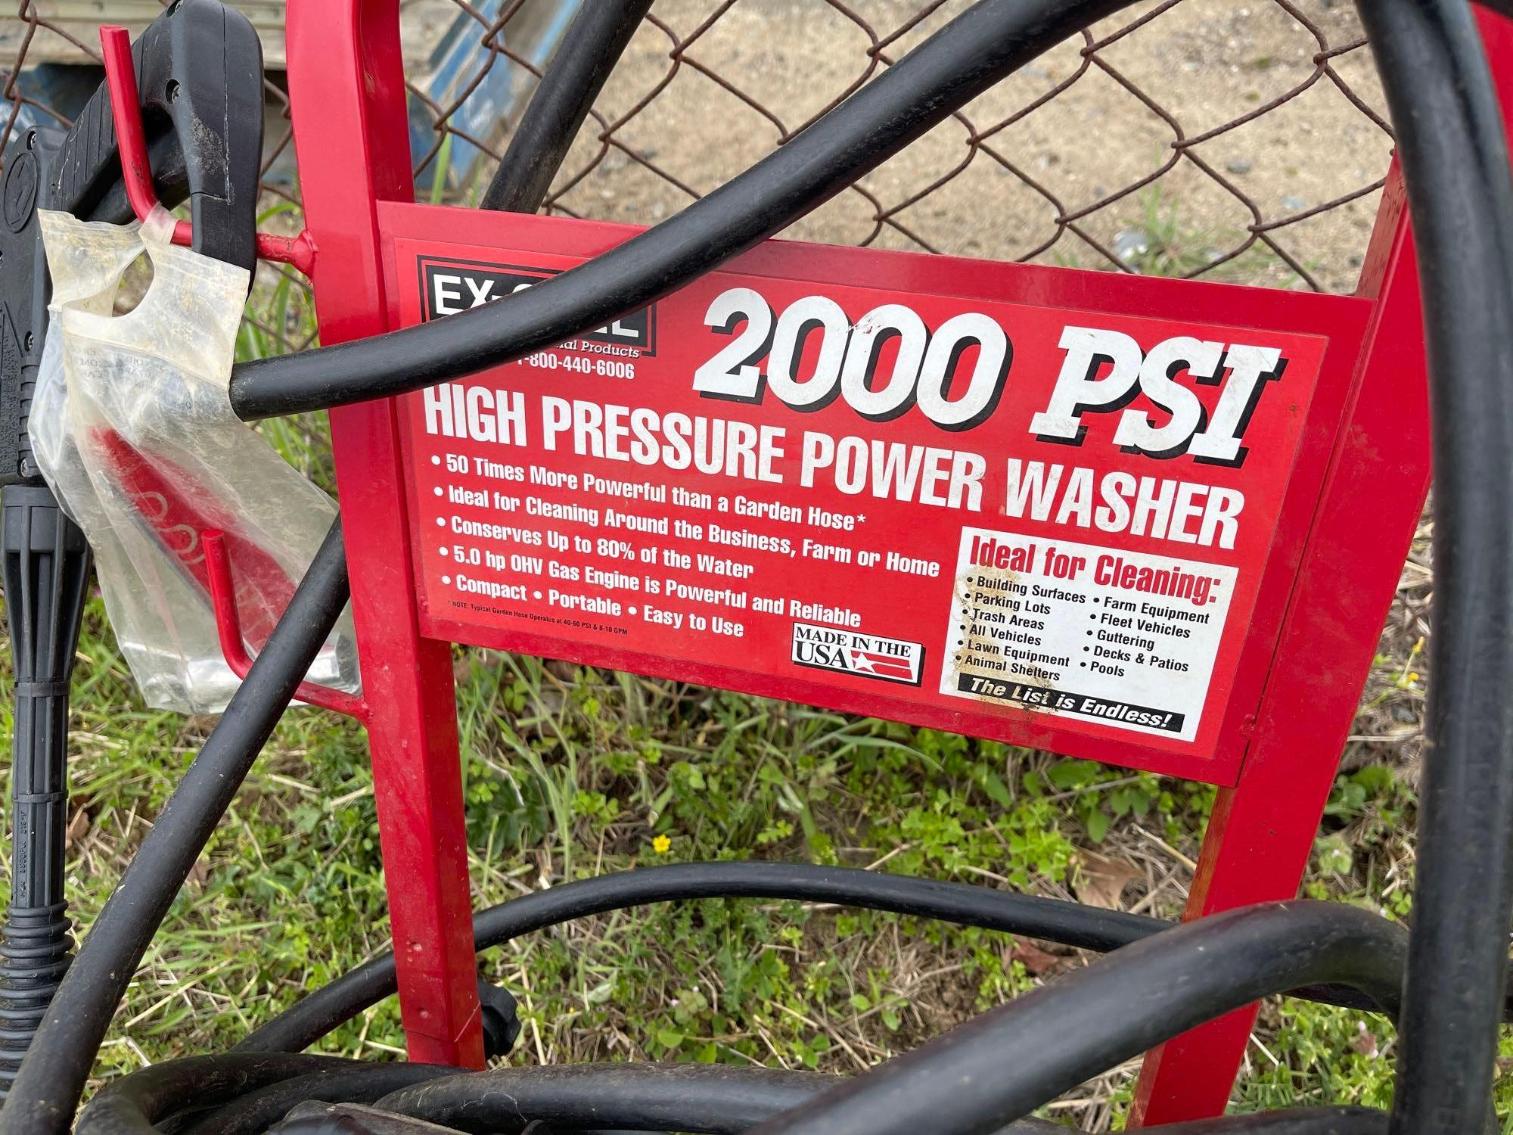 Image for EX-Cell Pressure Washer 2000 PSI, per seller- needs carb work